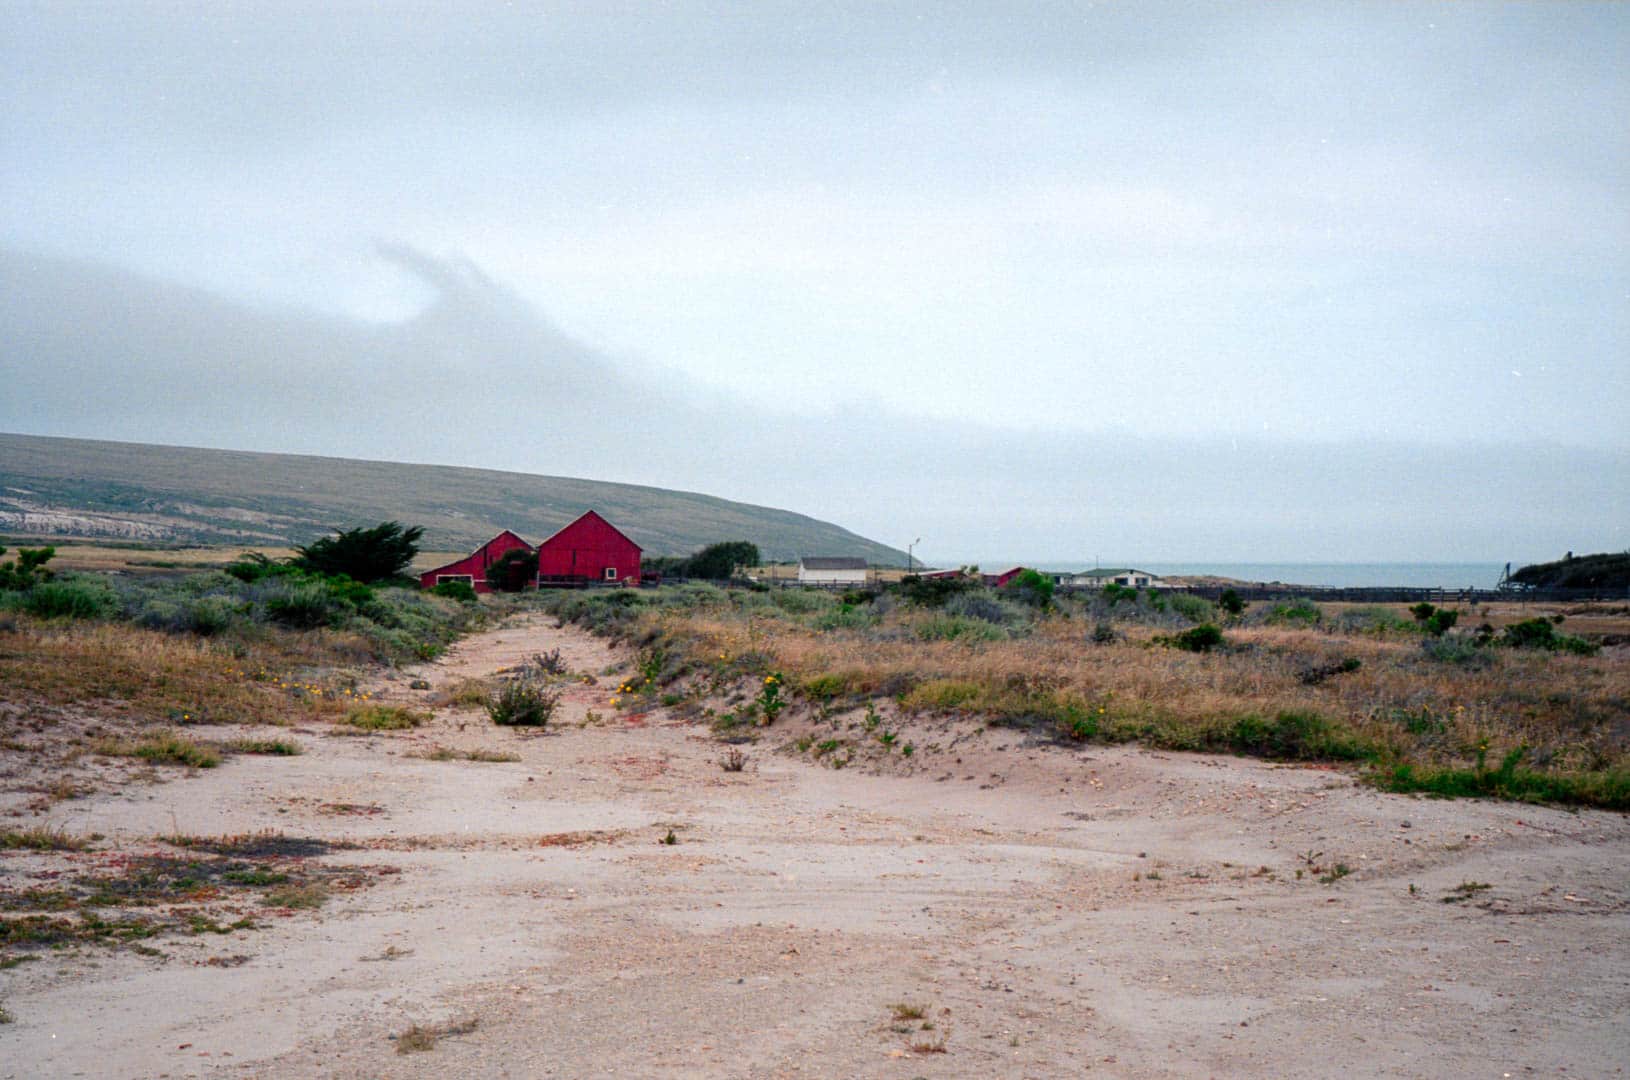 A red barn amidst a windswept costal landscape